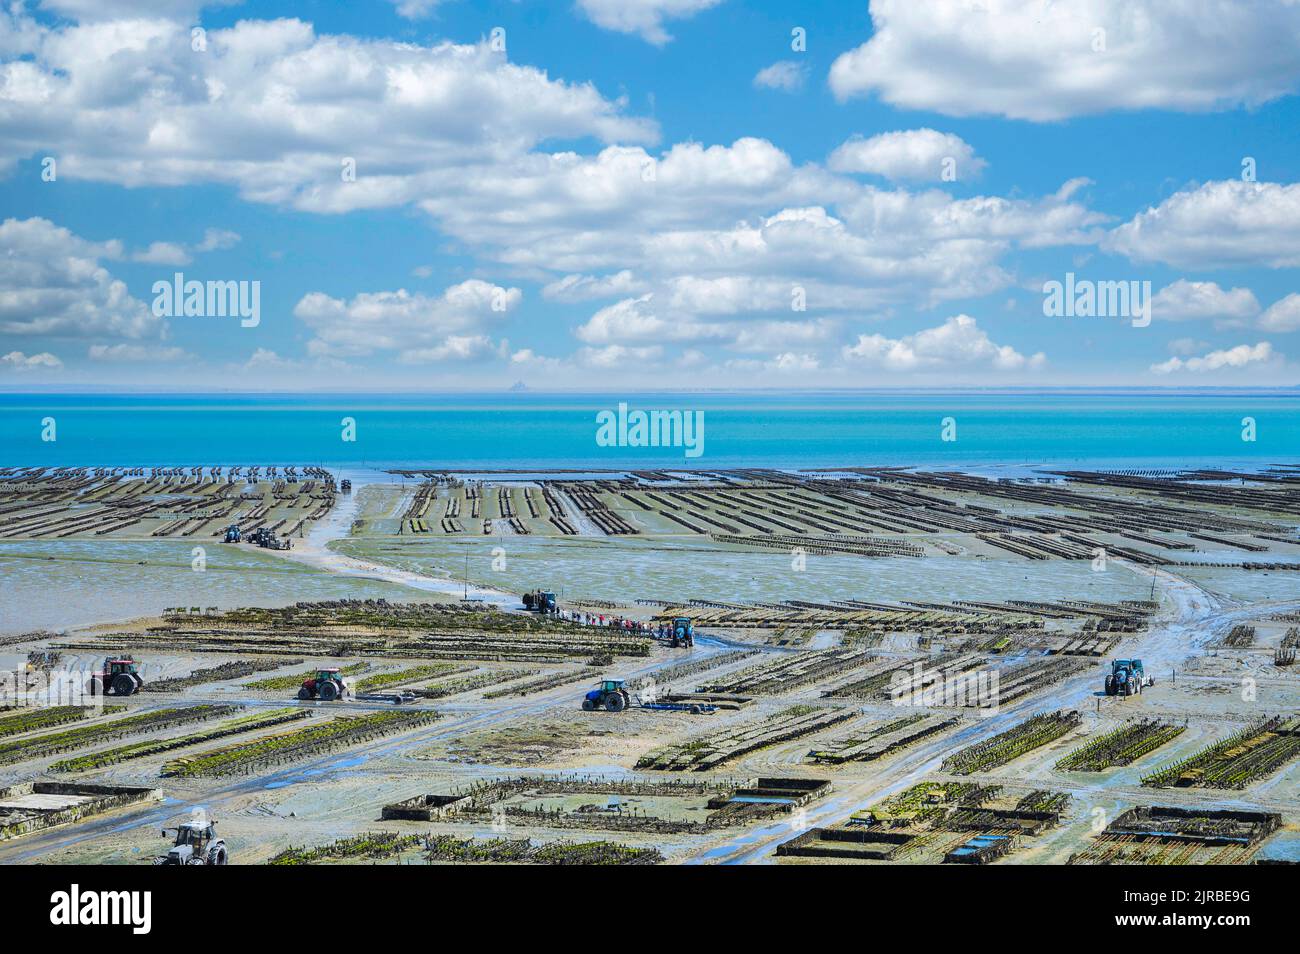 Oyster beds at low tide in oyster farm, Cancale, Brittany, France Stock Photo